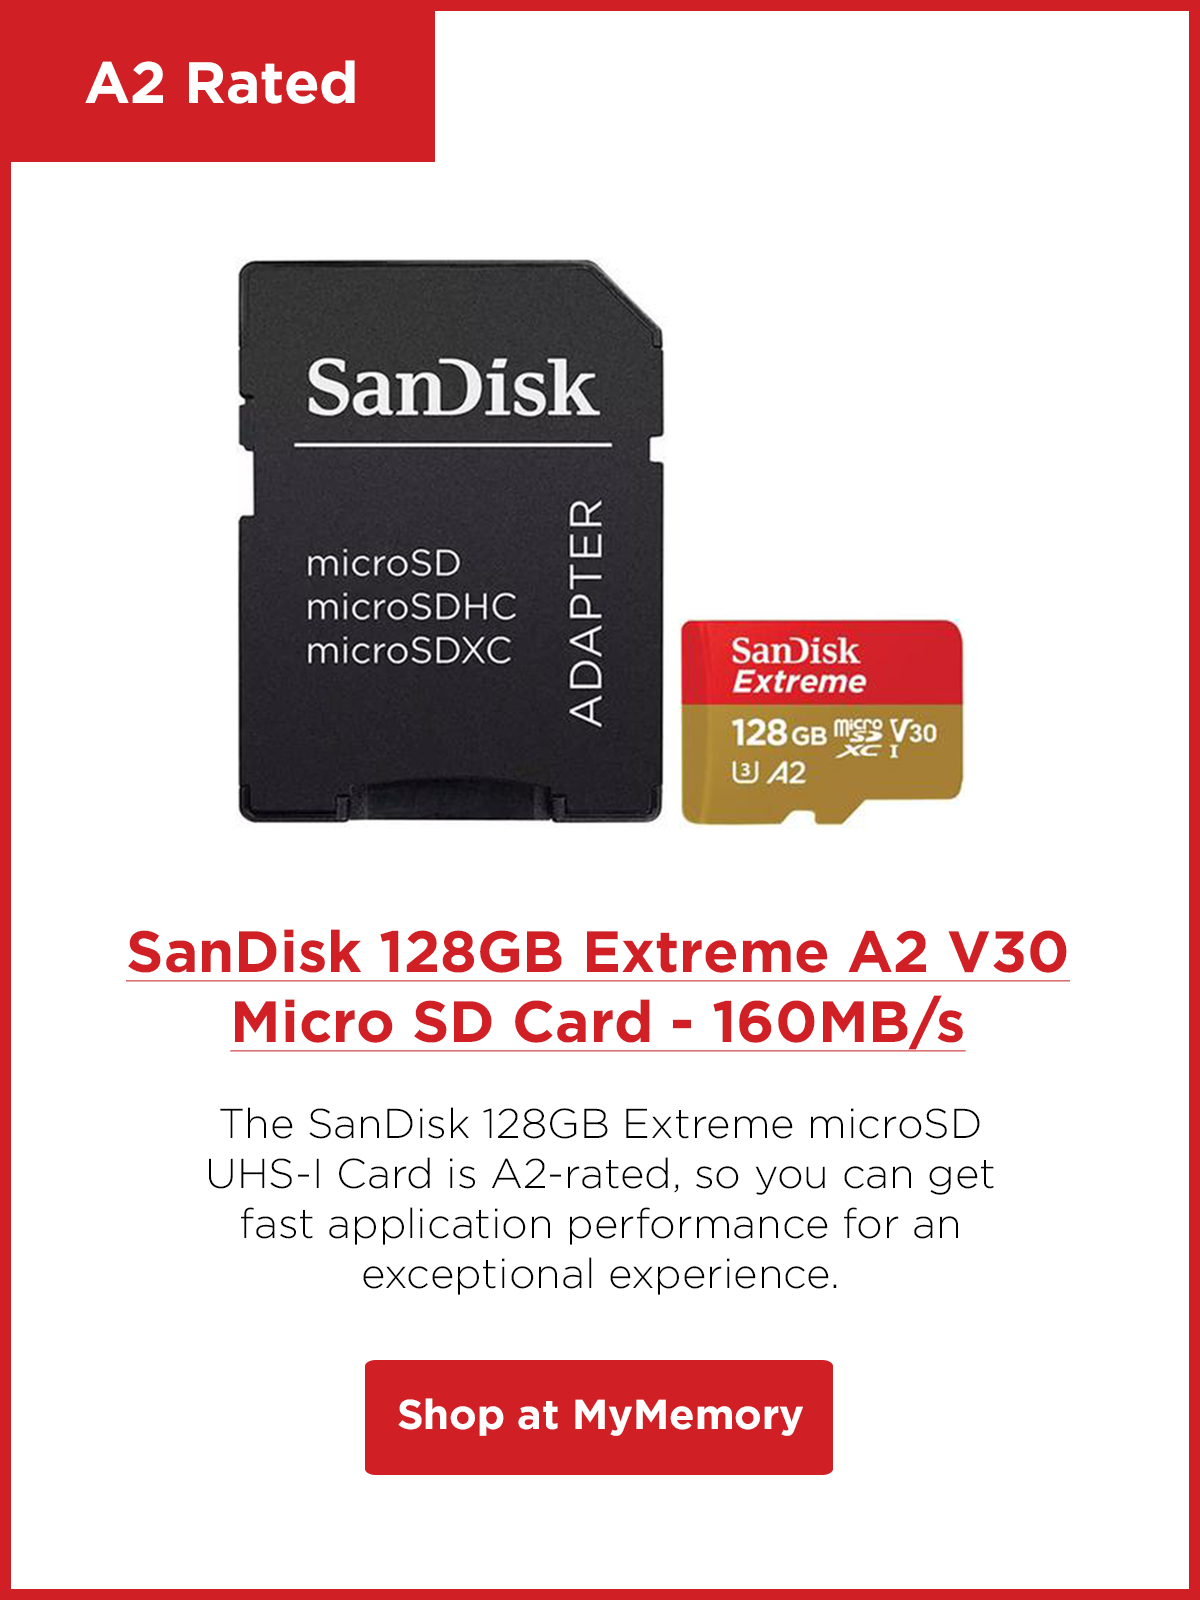 A1 Vs Sandisk Microsd Card What S The Difference Mymemory Blog